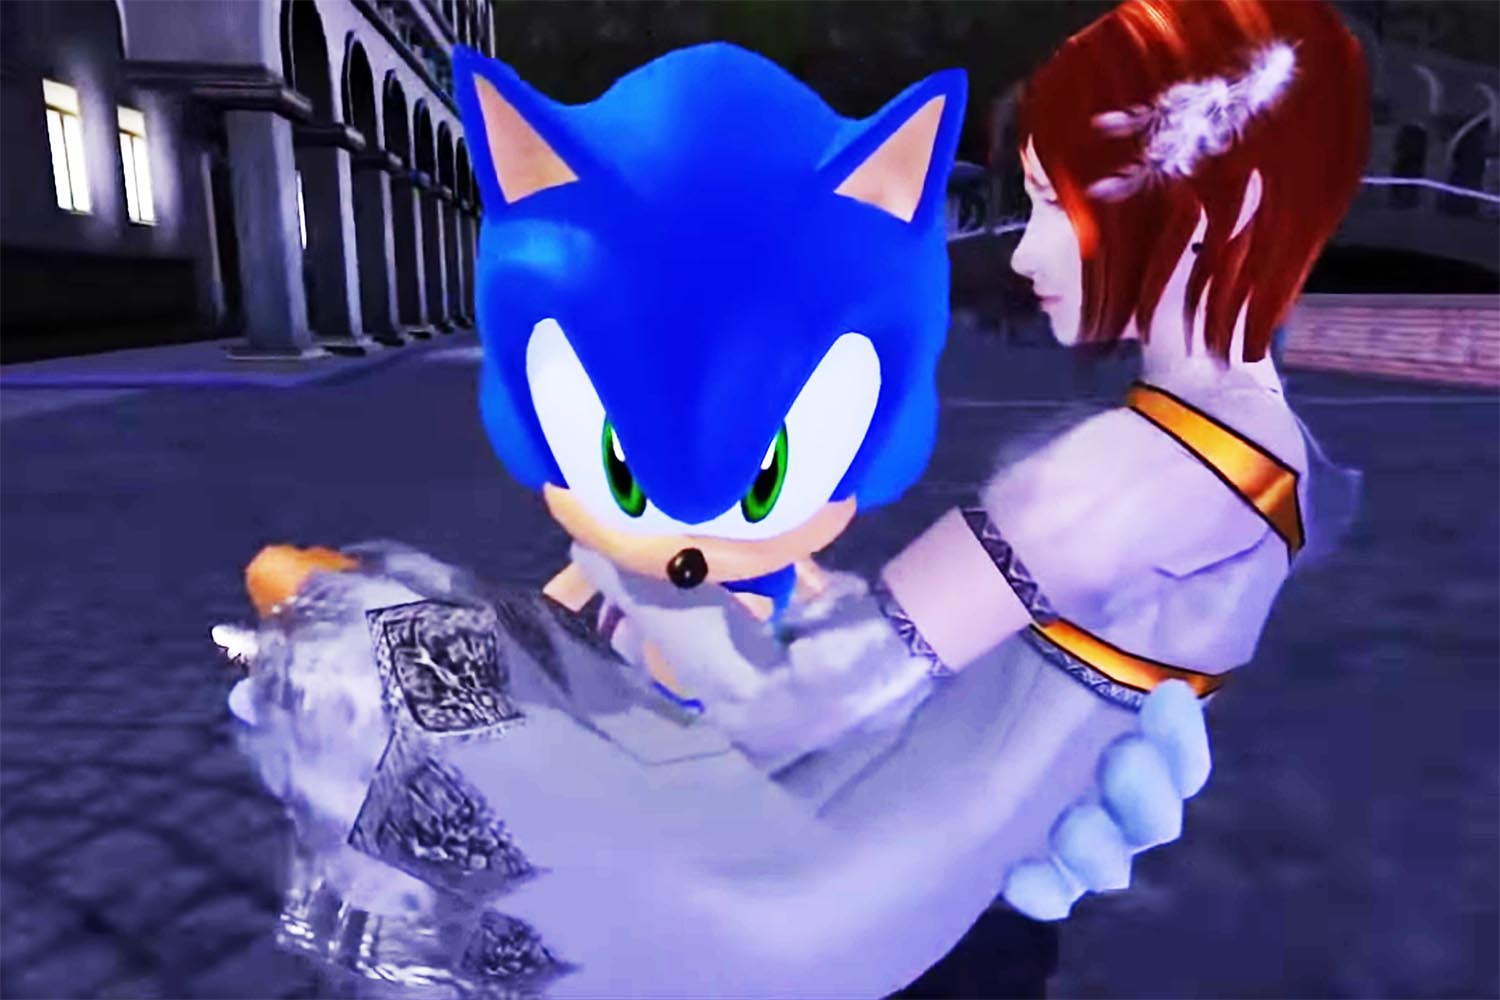 Top 3 Worst Sonic Games of All-Time